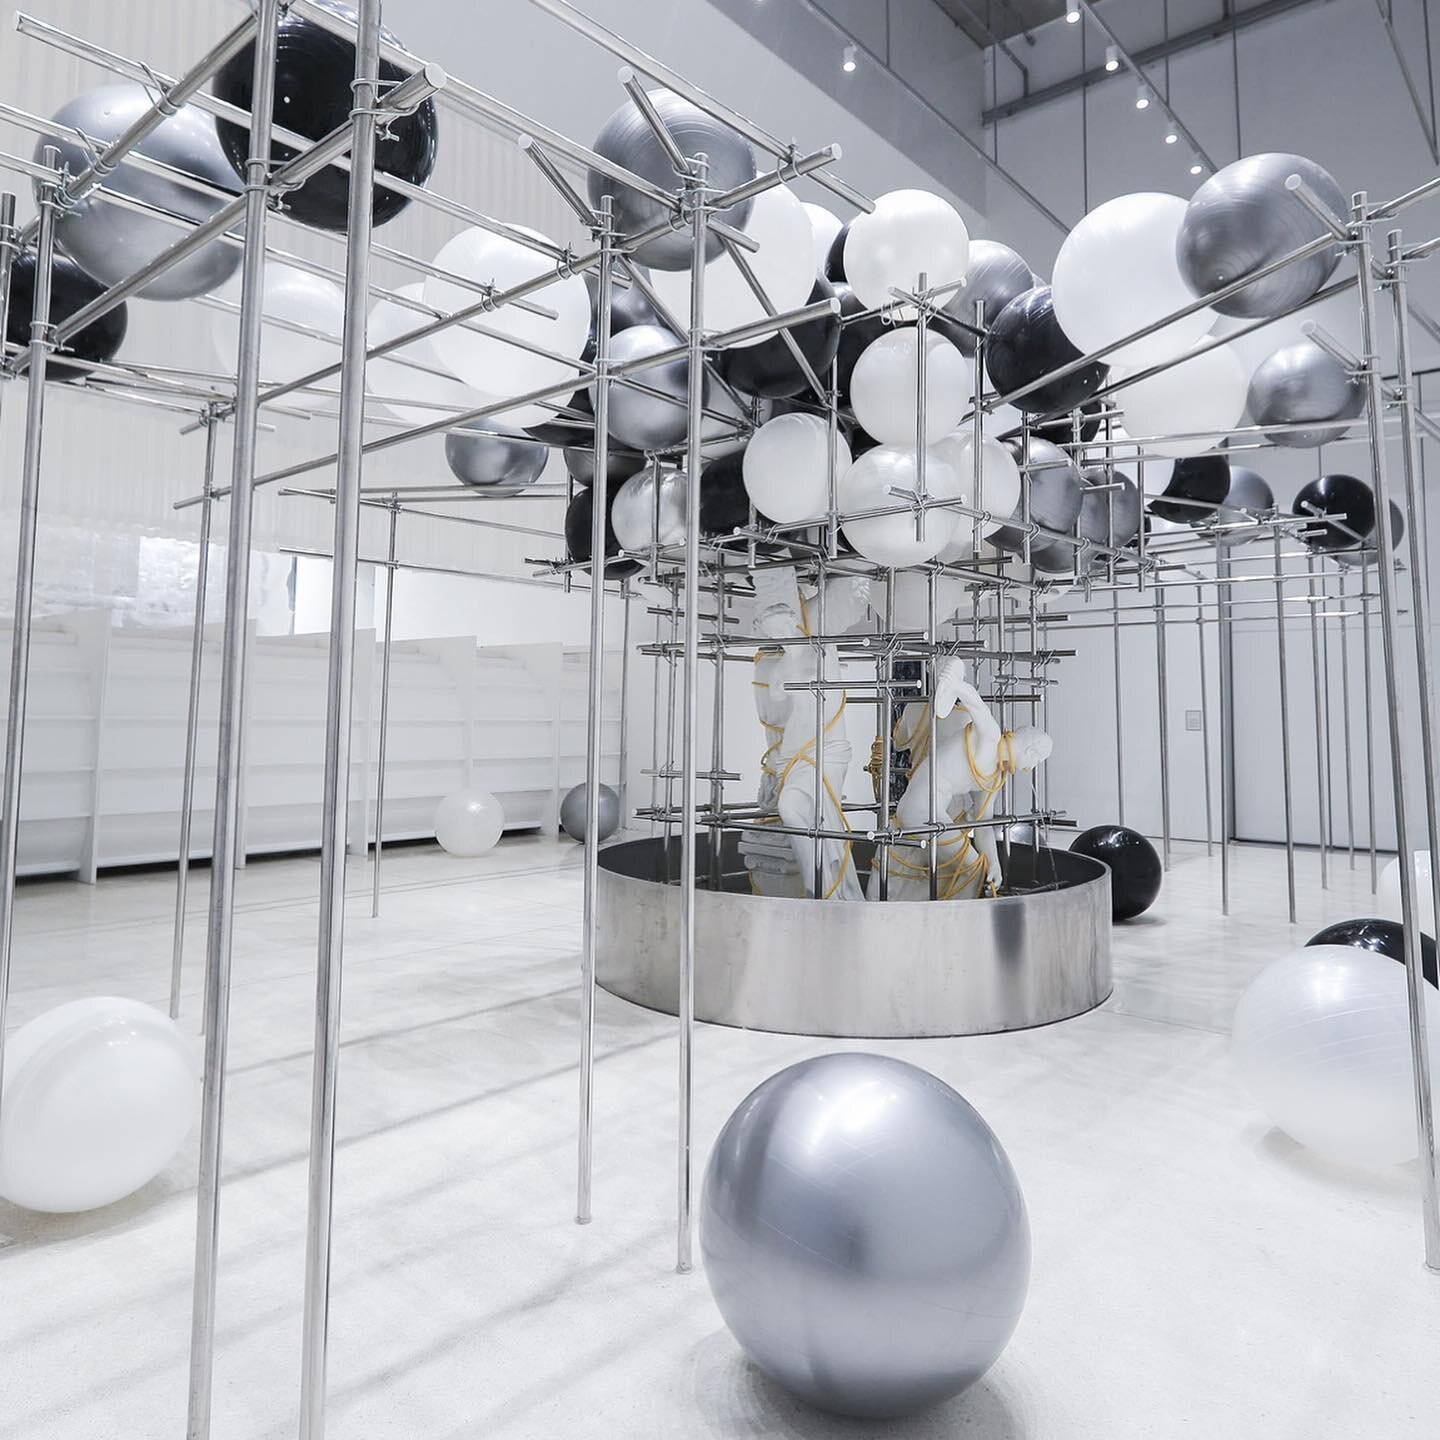 &lsquo;title something like the power of love&rsquo; 2020 Times Museum, Beijing. Athlesiure antiquity superstars with yoga balls, hose pipe and scaffold

#athleisure #discobolus #nike #yoga #sculpture #contemporaryart #fountain #fitnessjourney #physi